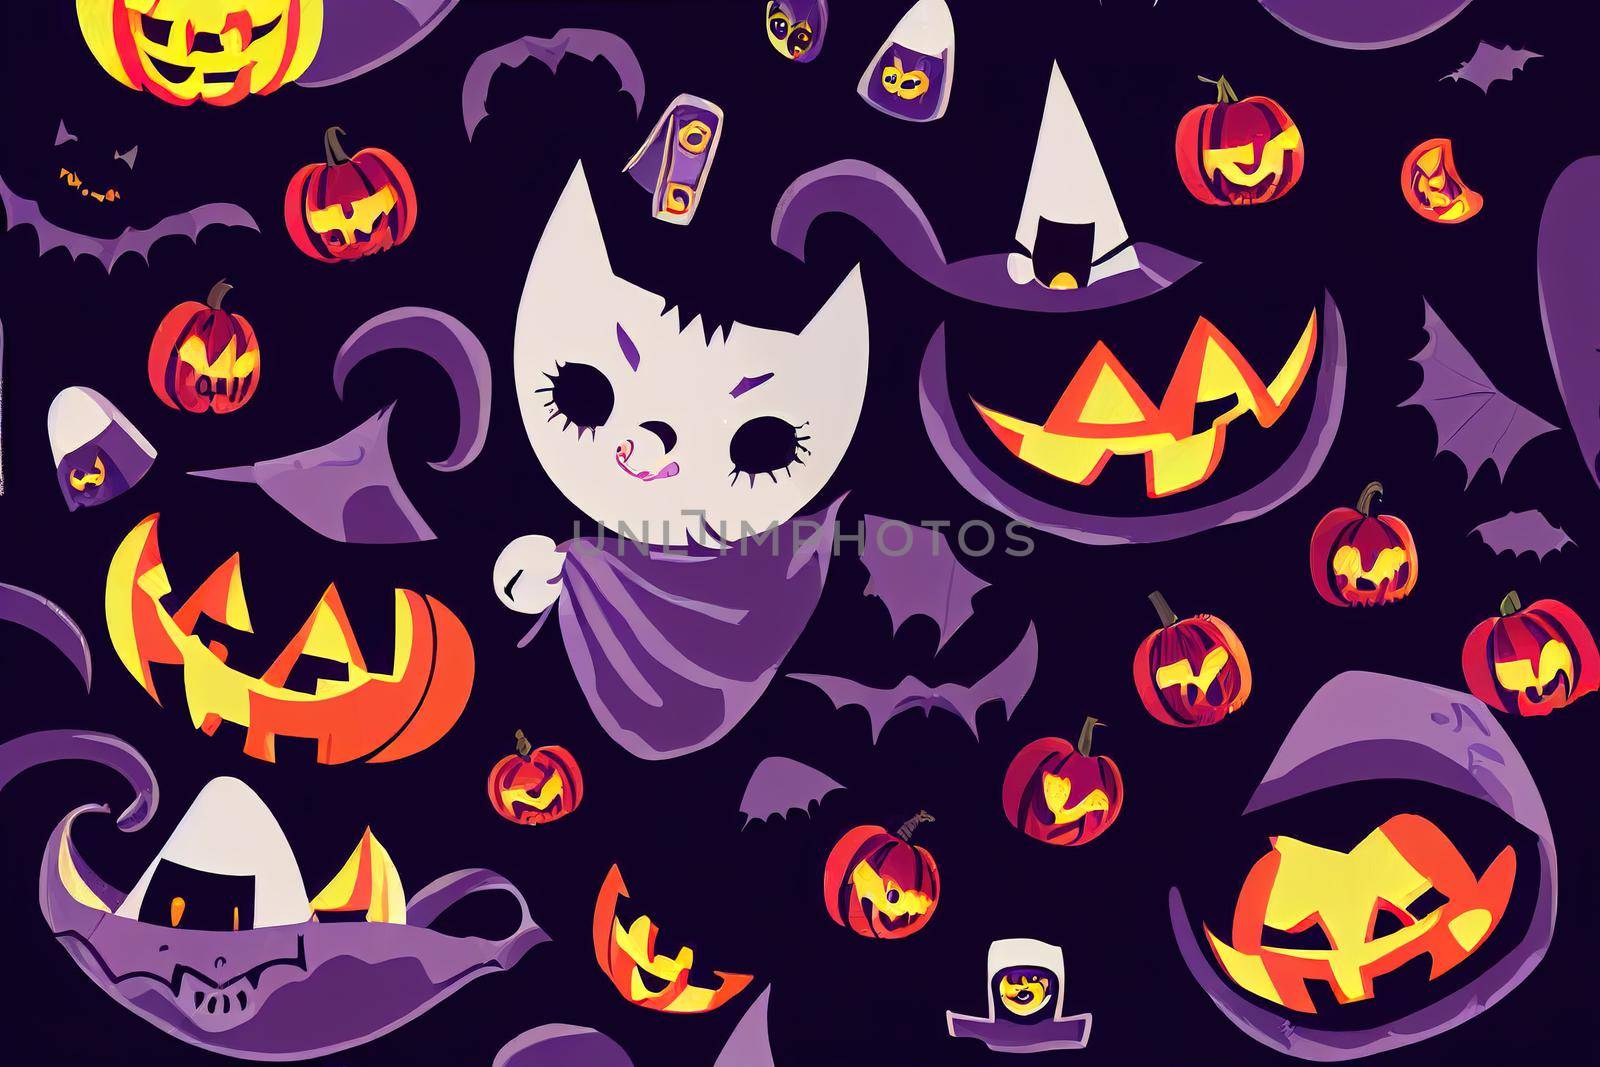 Cute Halloween Illustration, Infantile Style Halloween Party Print with Funny Vampire Isolated on a Violet Background Ideal for Card,Wall Art, Starry Irregular Seamless Pattern, ,toon style v2